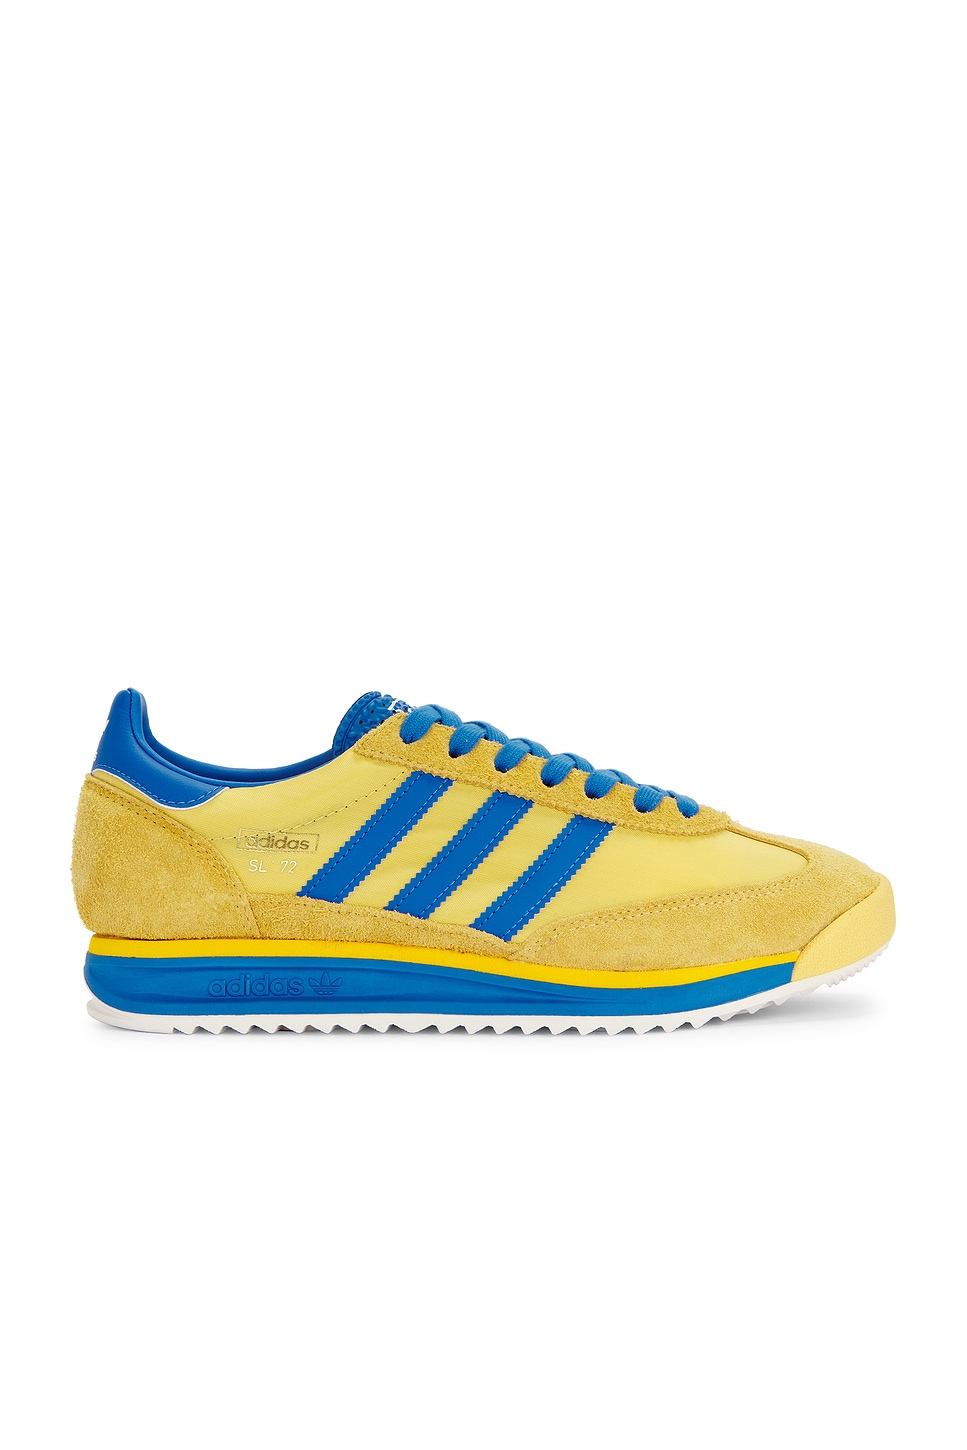 Image 1 of adidas Originals Sl 72 Rs Sneaker in Utility Yellow, Bright Royal, & Core White